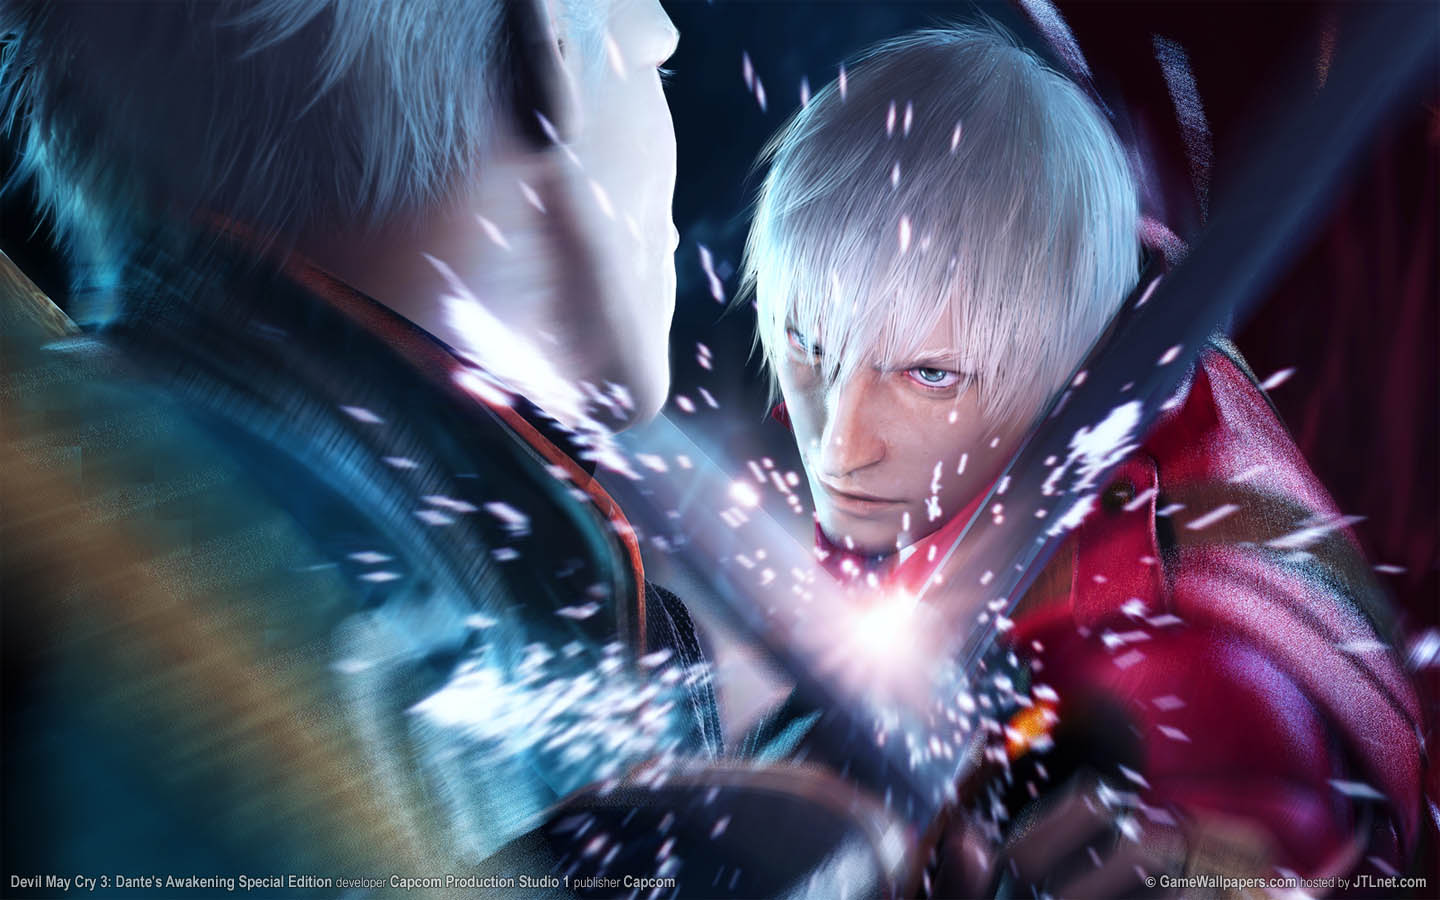 Devil May Cry 3%3A Dante%5C%27s Awakening Special Edition fond d'cran 01 1440x900